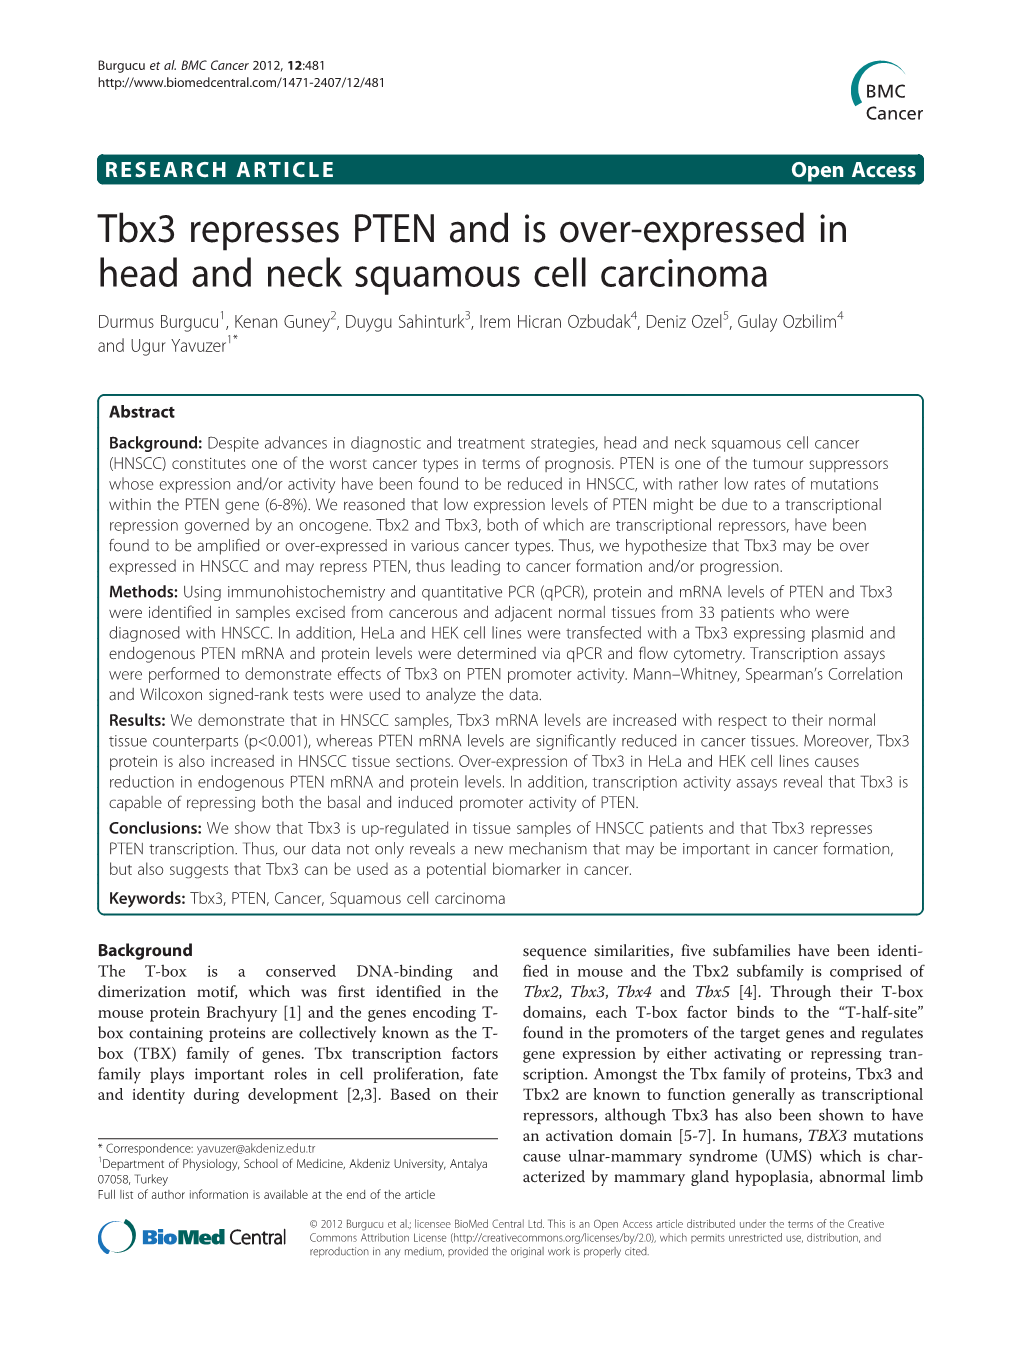 Tbx3 Represses PTEN and Is Over-Expressed in Head and Neck